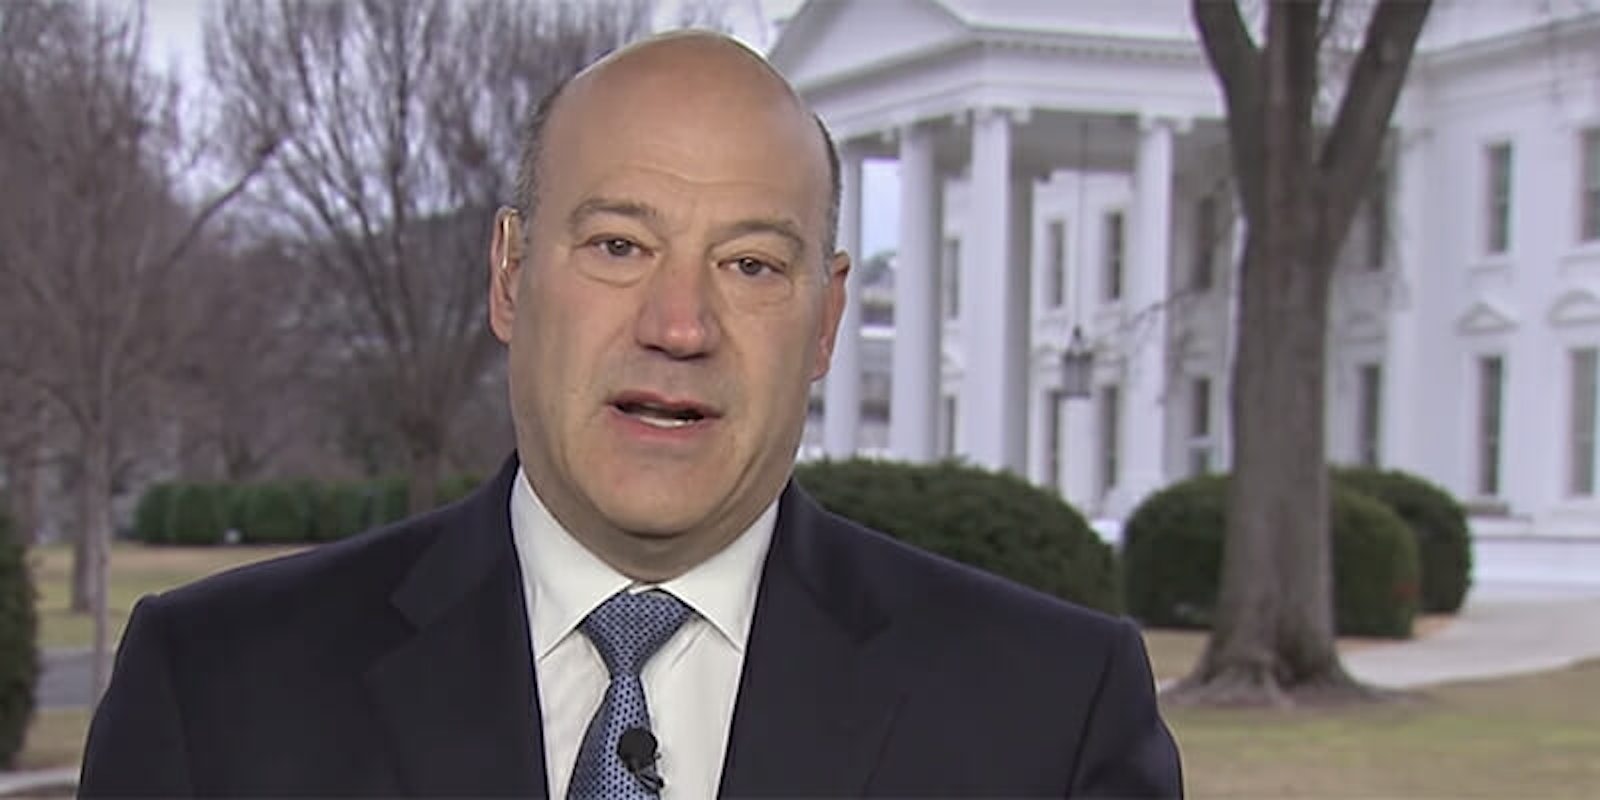 Gary Cohn will reportedly resign from his position as Trump’s chief economic adviser.